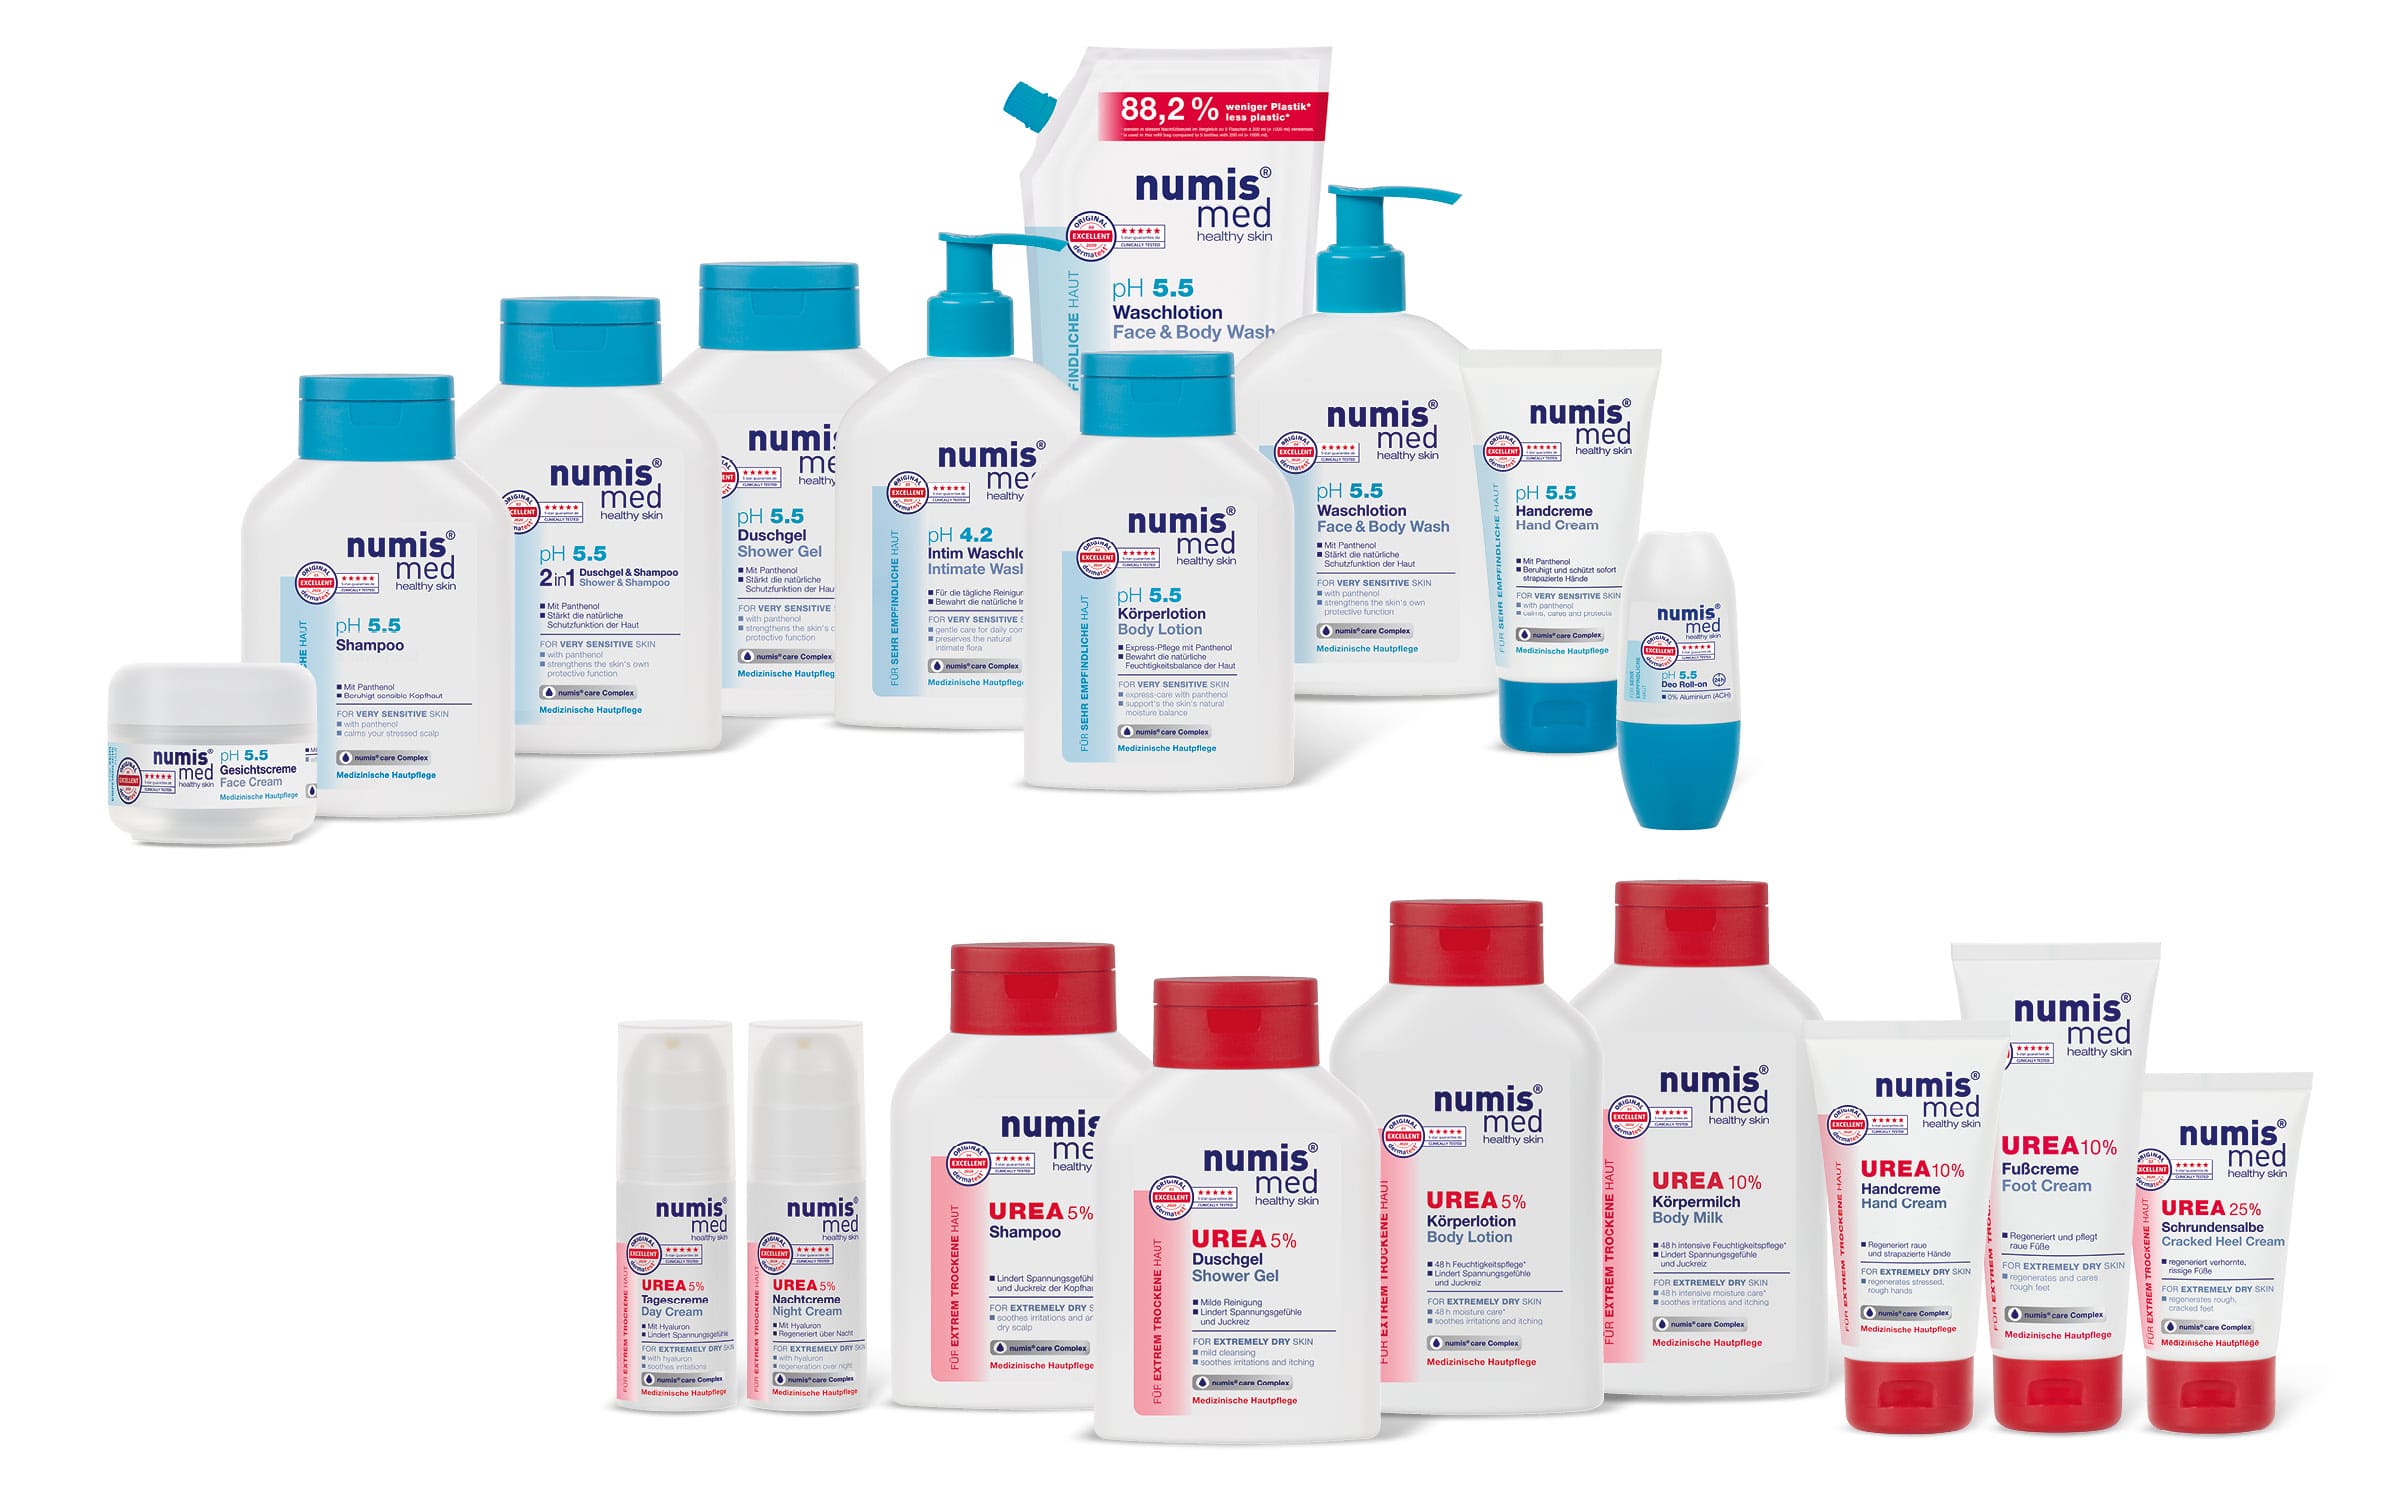 All numis® med products of the UREA and ph5.5 series at a glance